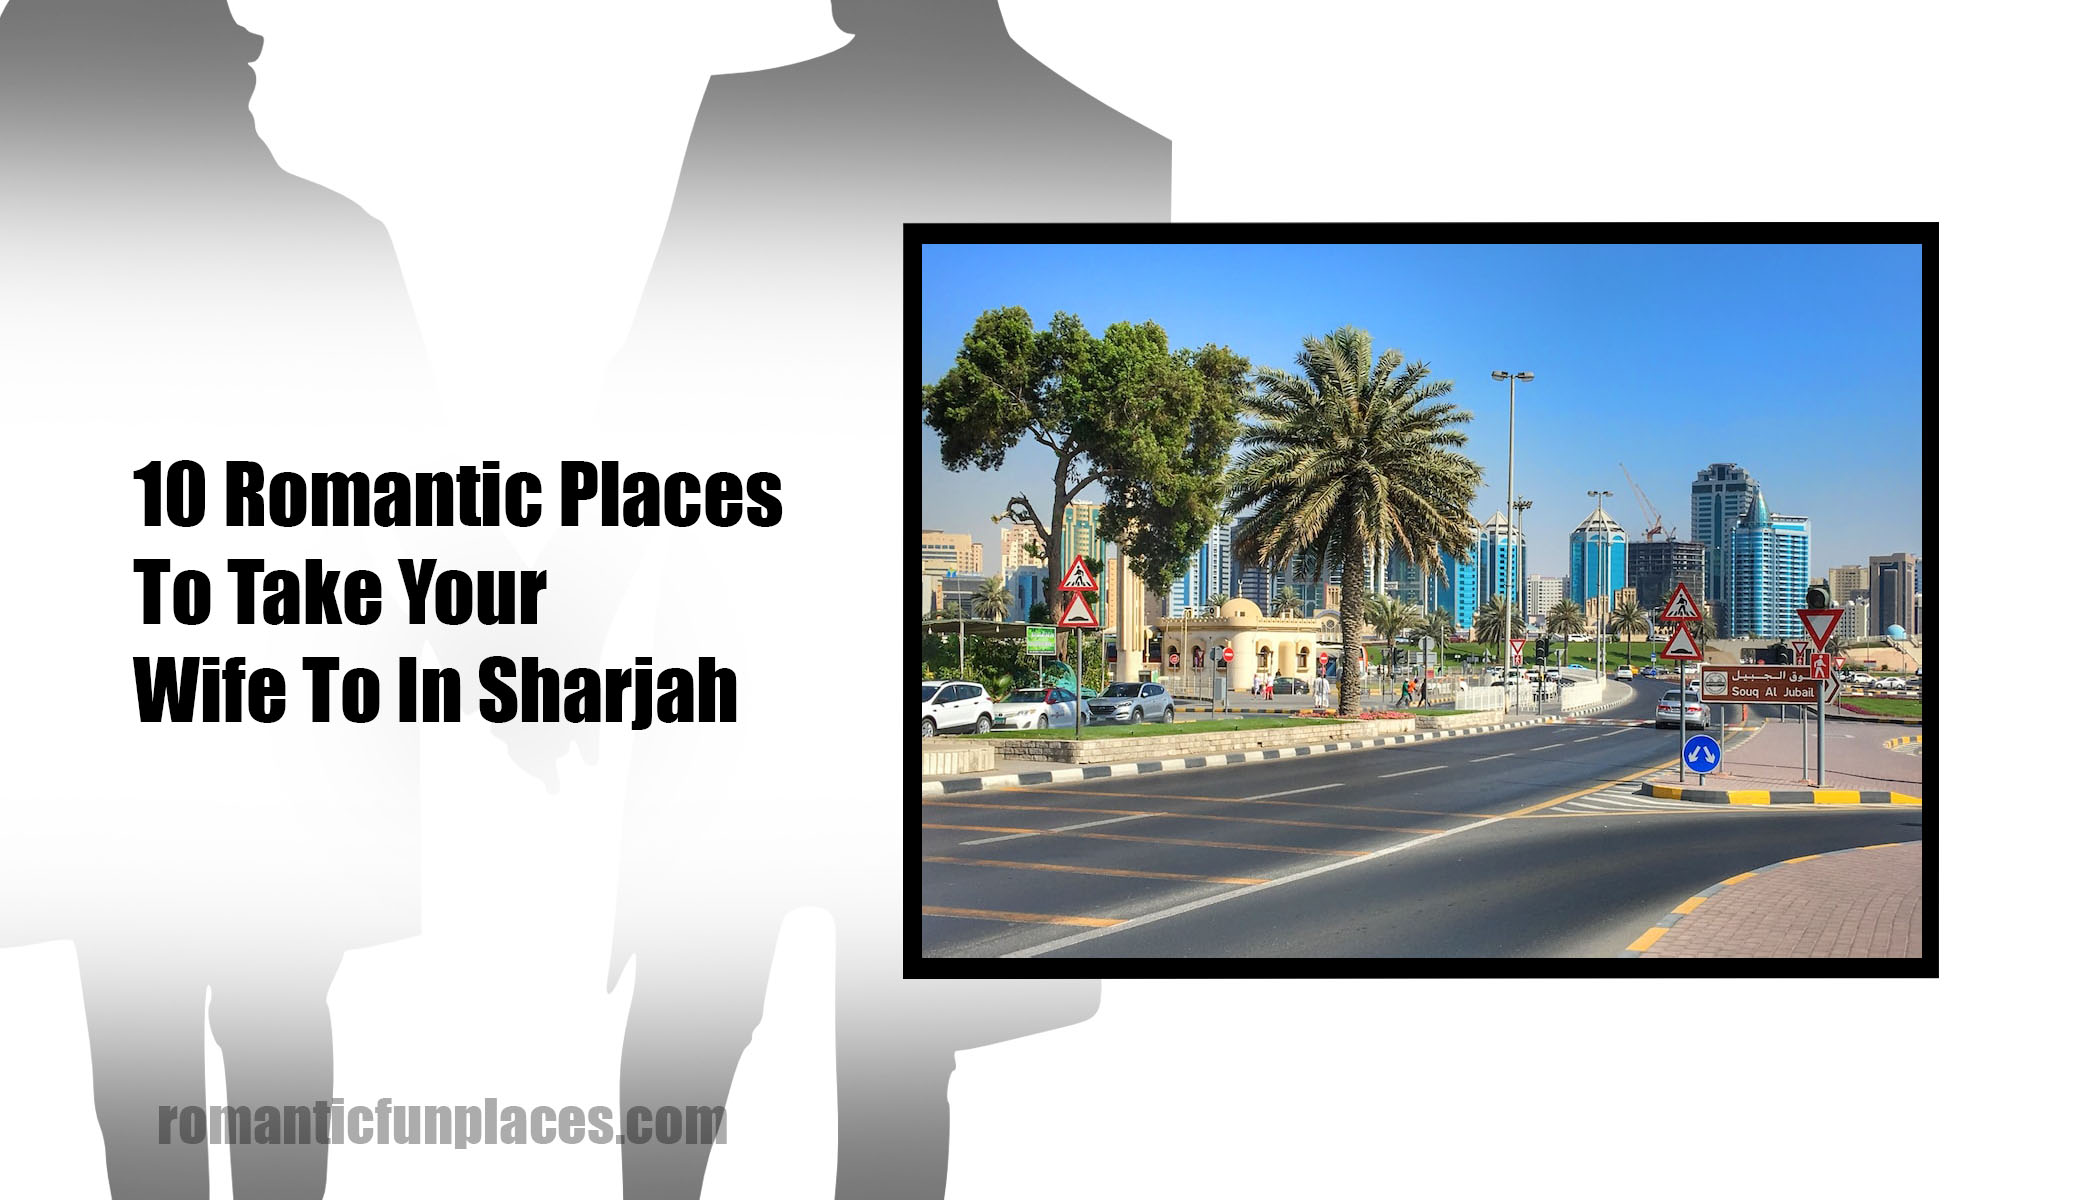 10 Romantic Places To Take Your Wife To In Sharjah